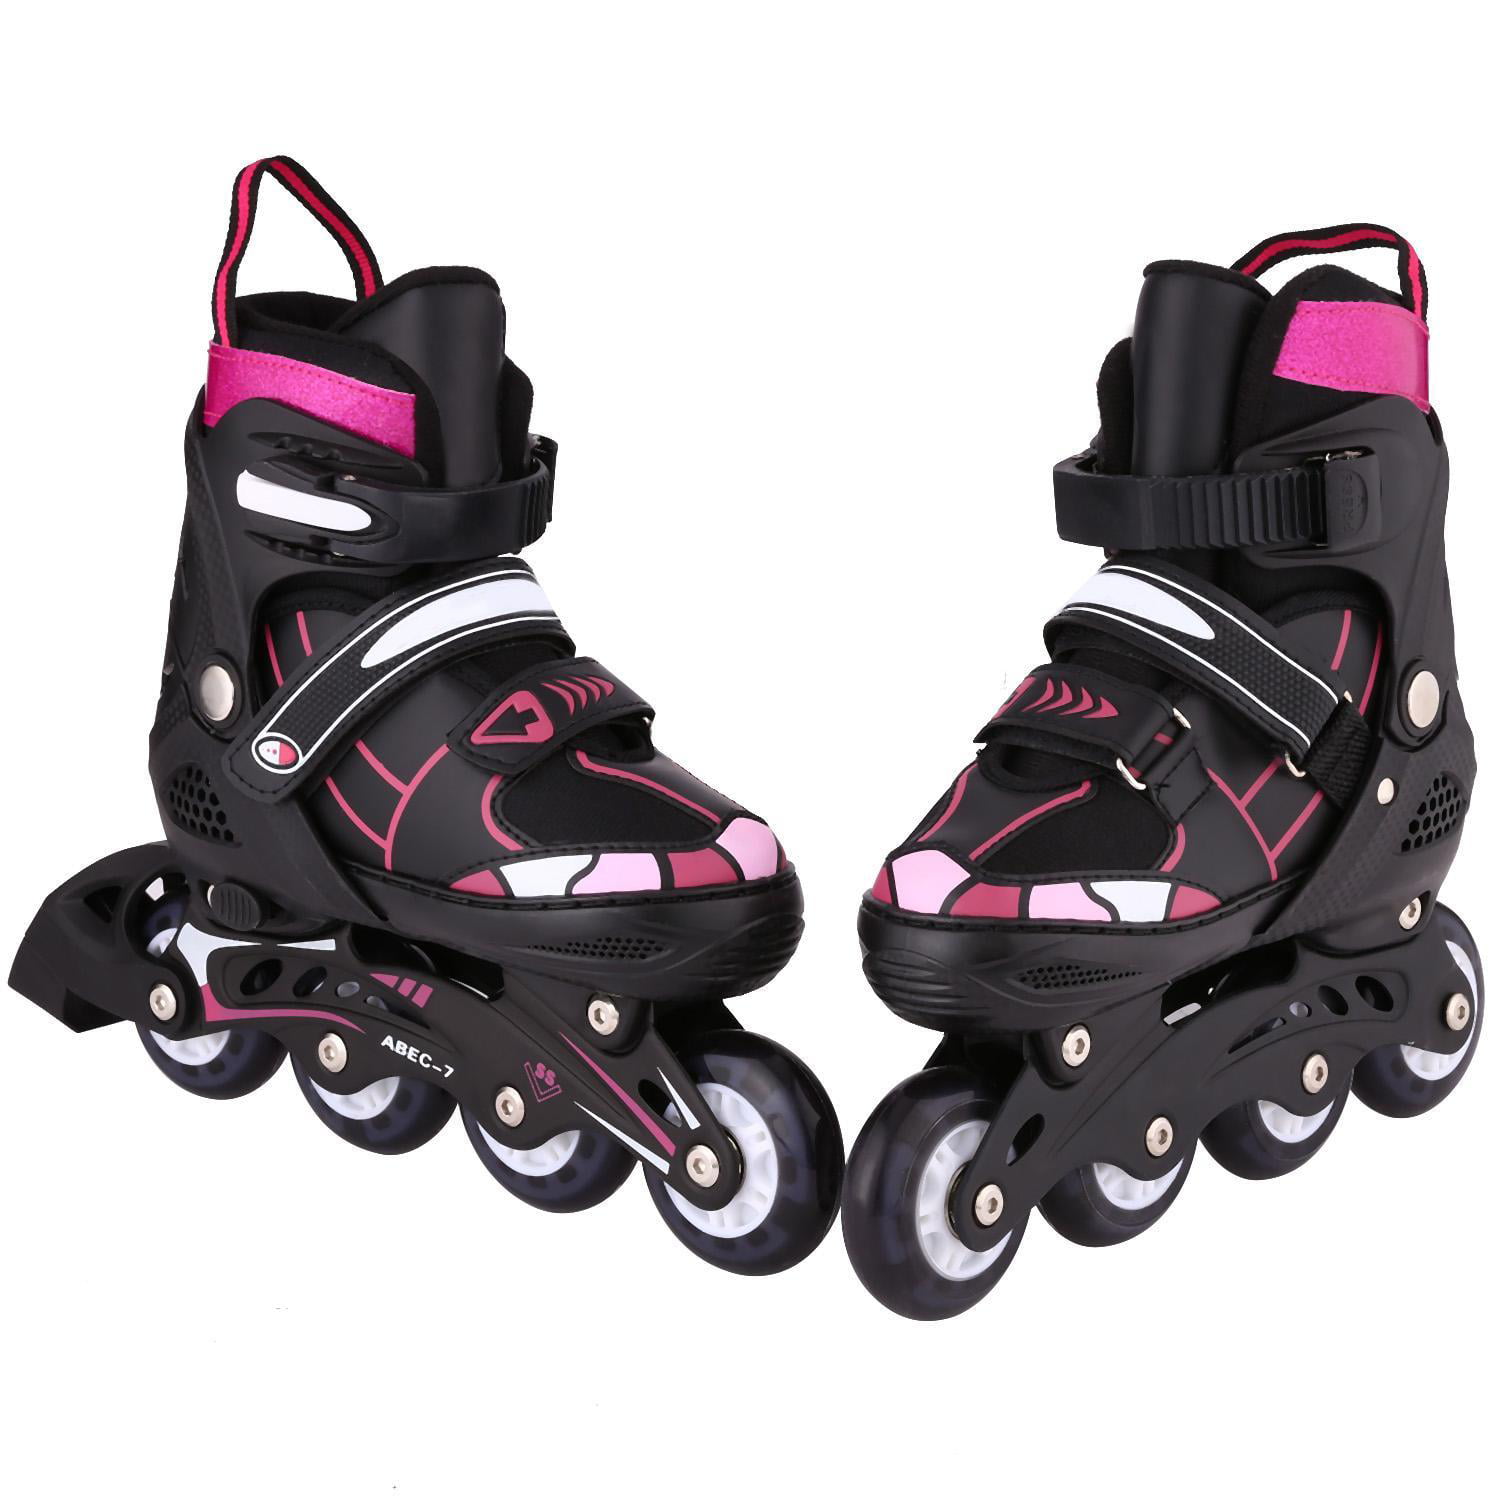 ANCHEER Inline Skates for Kids Adjustable with Light Up Wheels Beginner Roller Fun Flashing Illuminating Roller Skates for Kids Boys and Girls 2 Colors and 3 Sizes